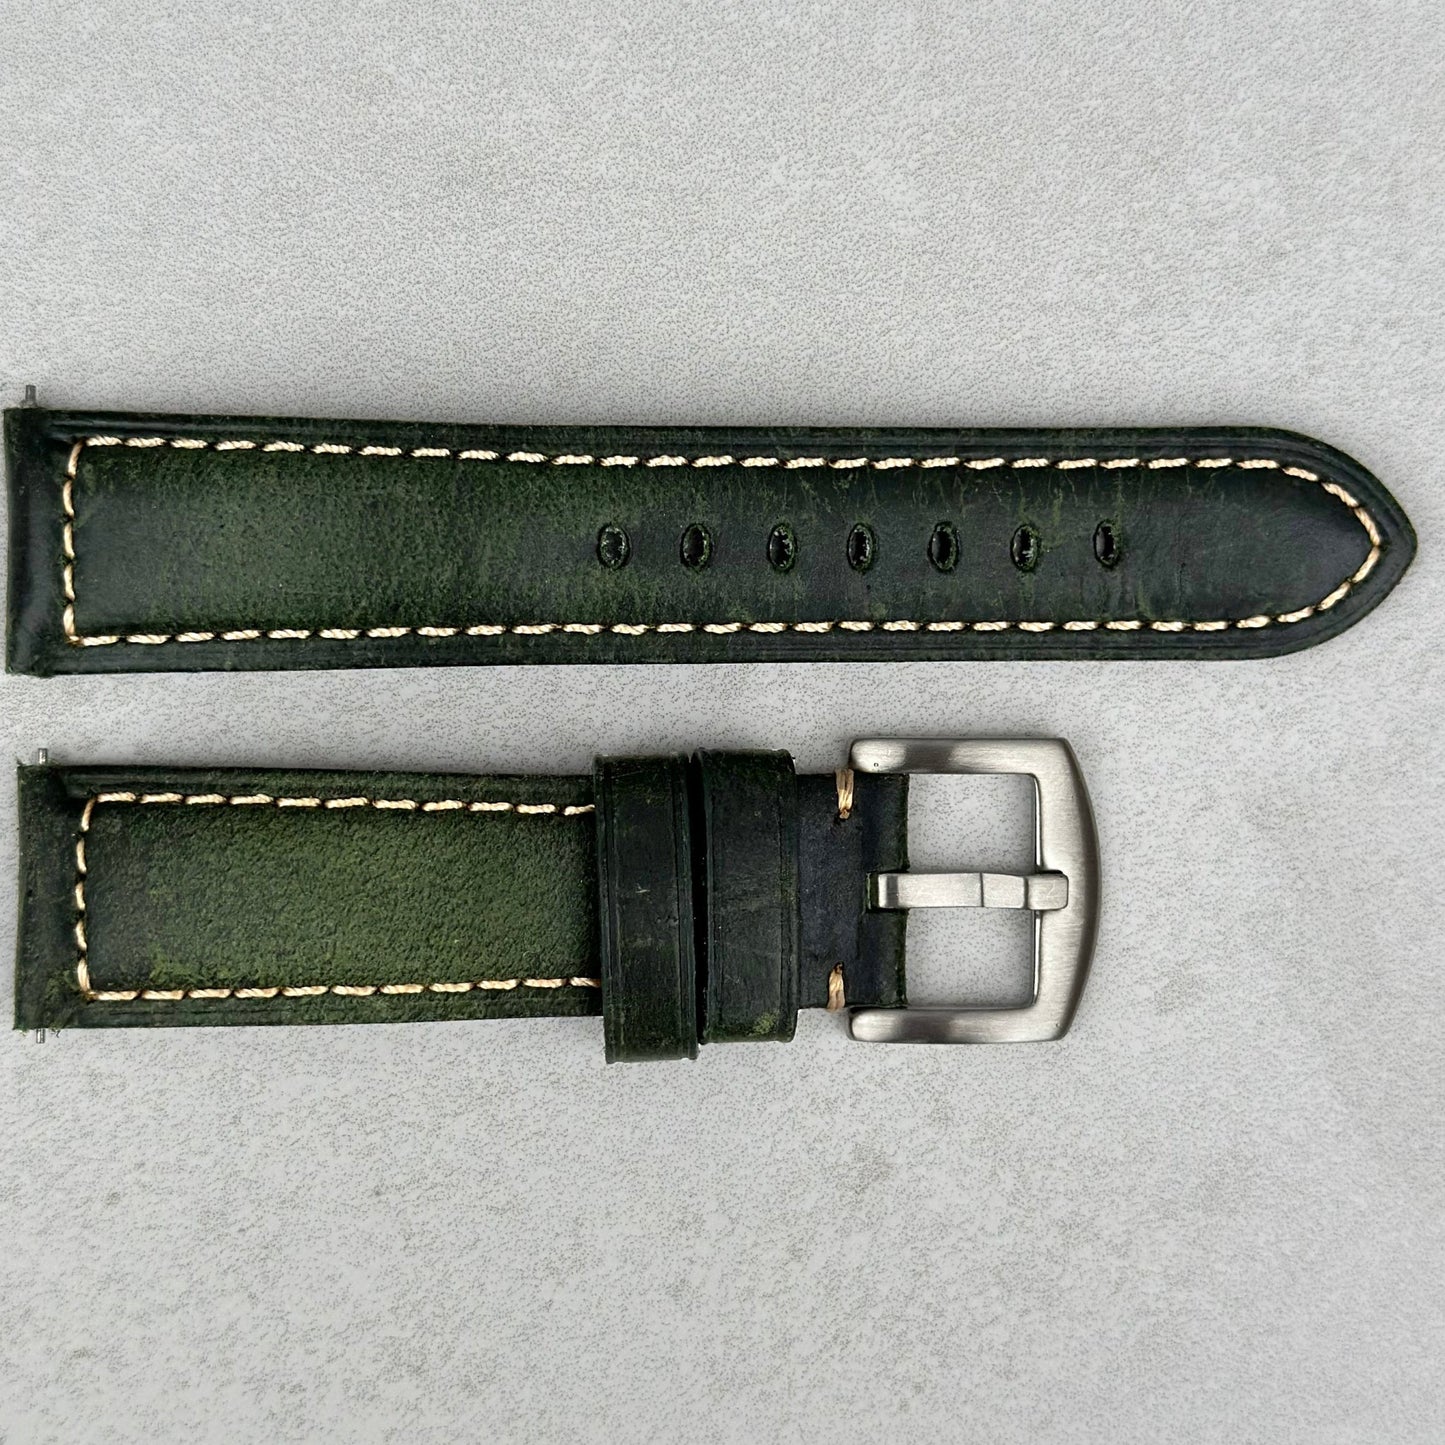 Berlin green full grain leather watch strap. Contrast ivory stitching. Brushed 316L stainless steel buckle. Watch And Strap.